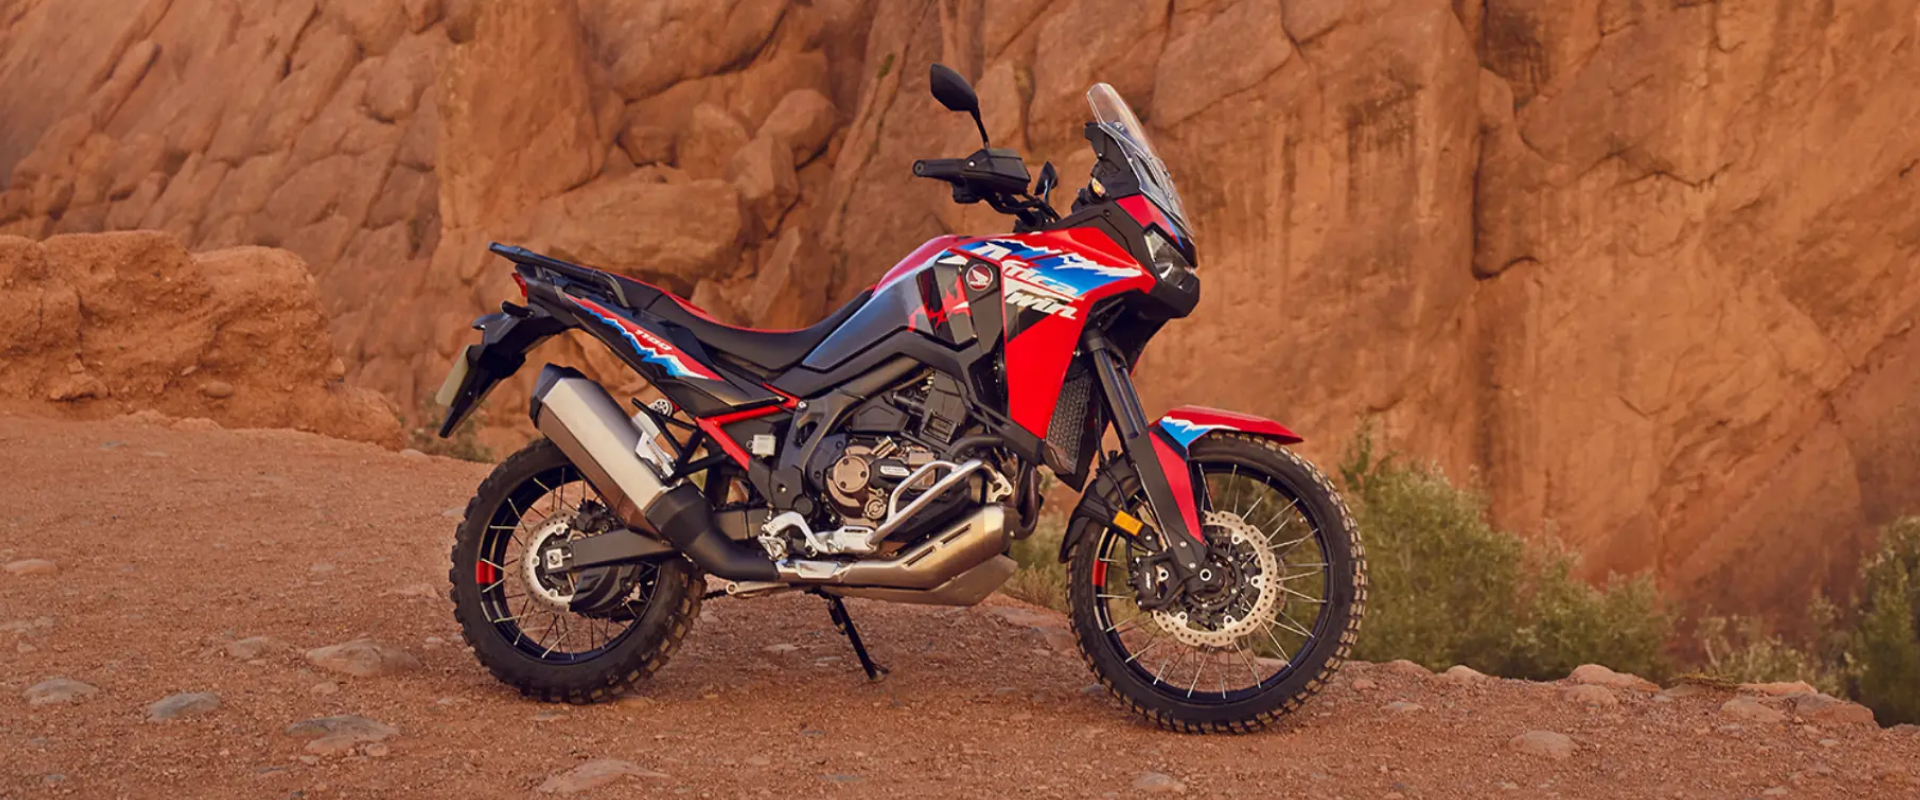  Africa Twin CRF1100L